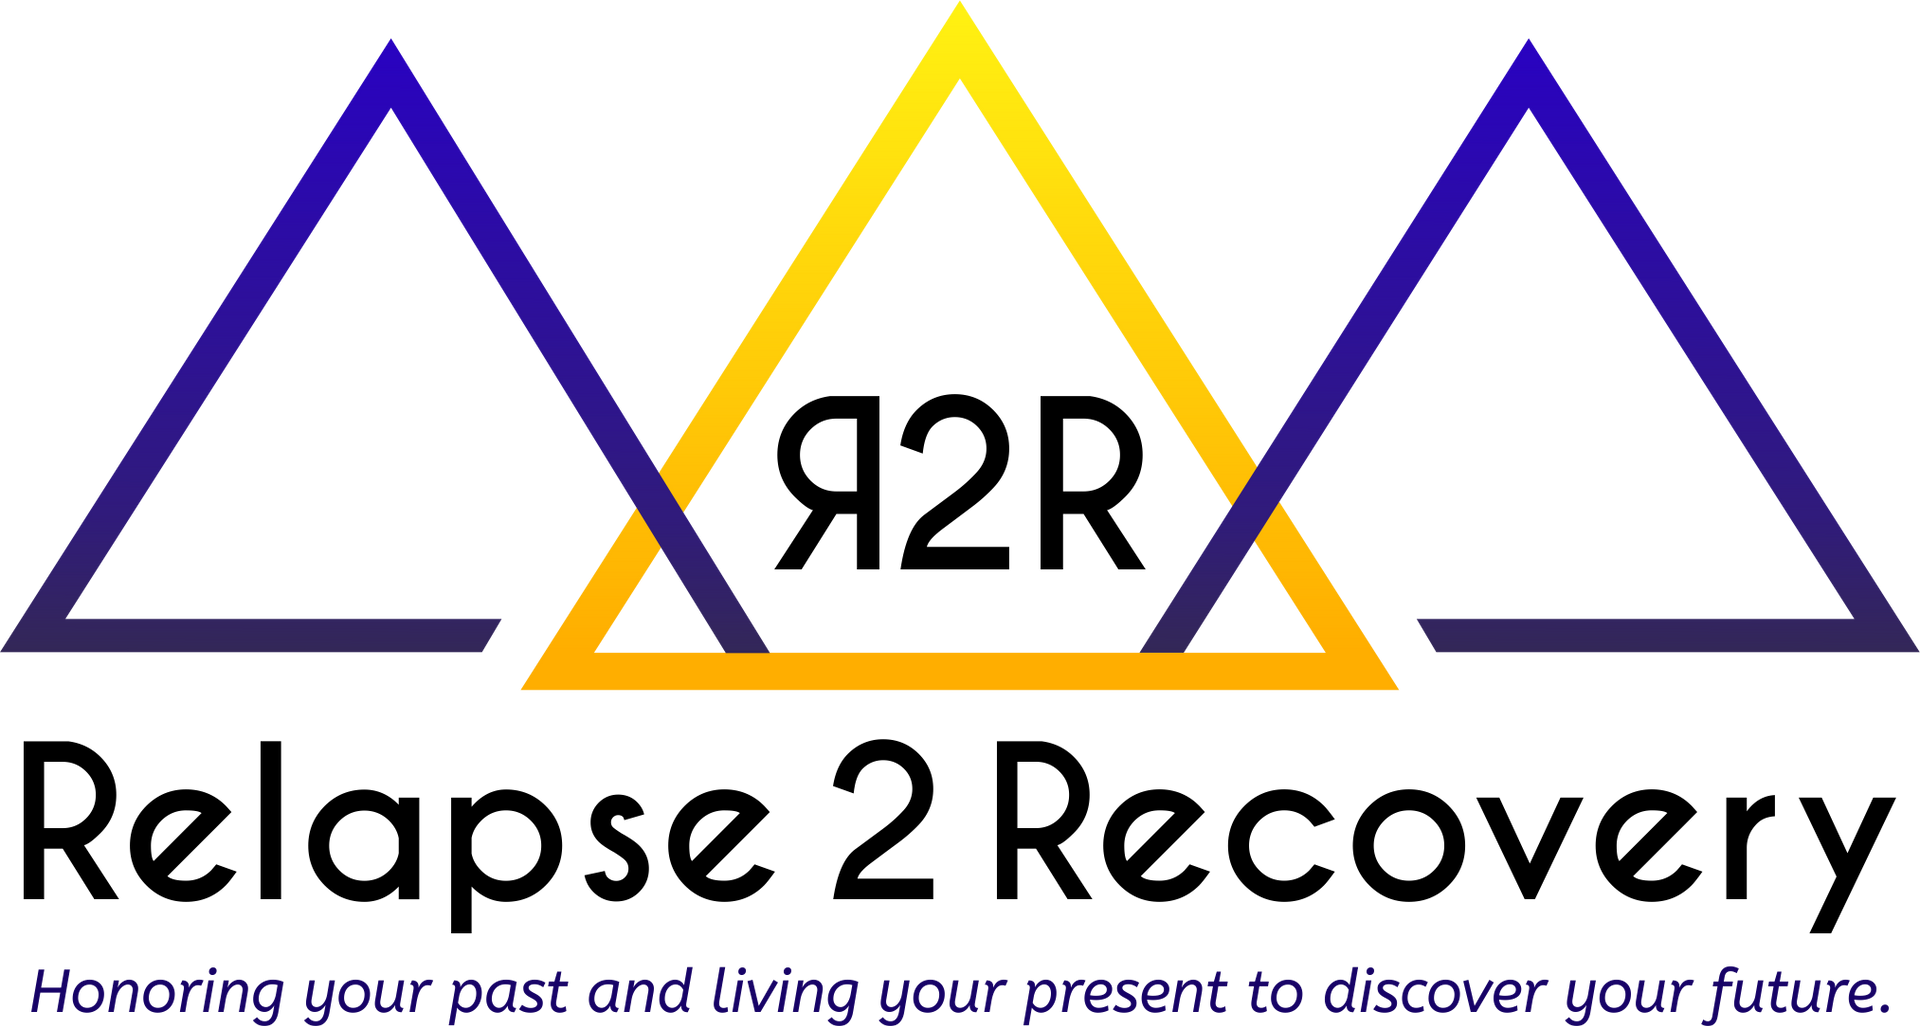 Relapse 2 Recovery - Honoring your past and living your present to discover your future | Empower CTC | Rochester, MN